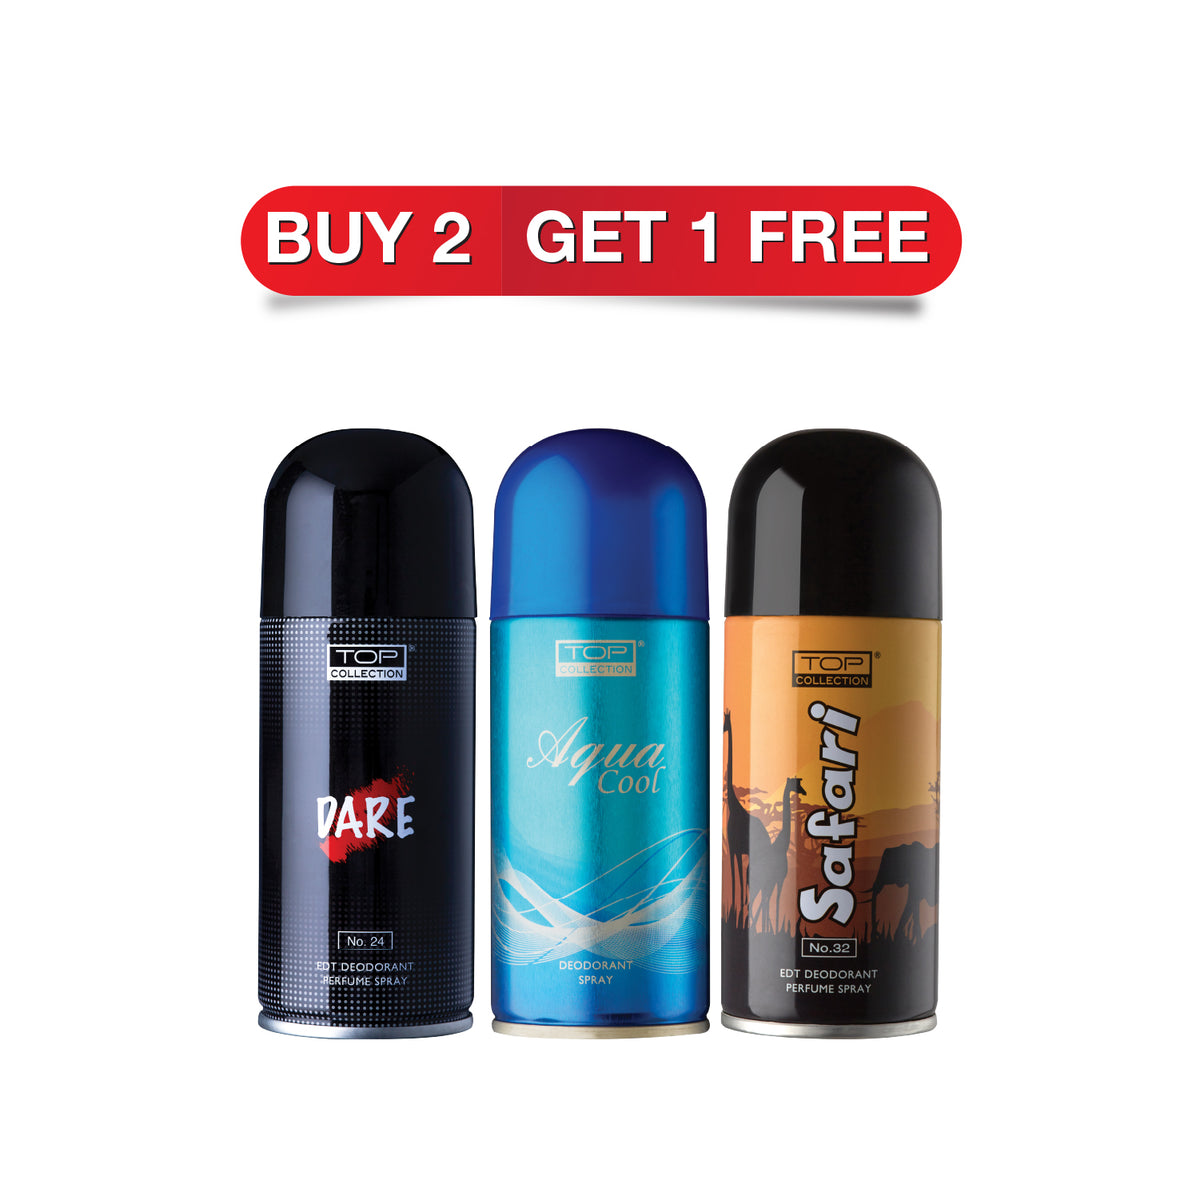 Top Collection Deodorant Perfume Spray Combo Offer 1 (GET 5 FREE)